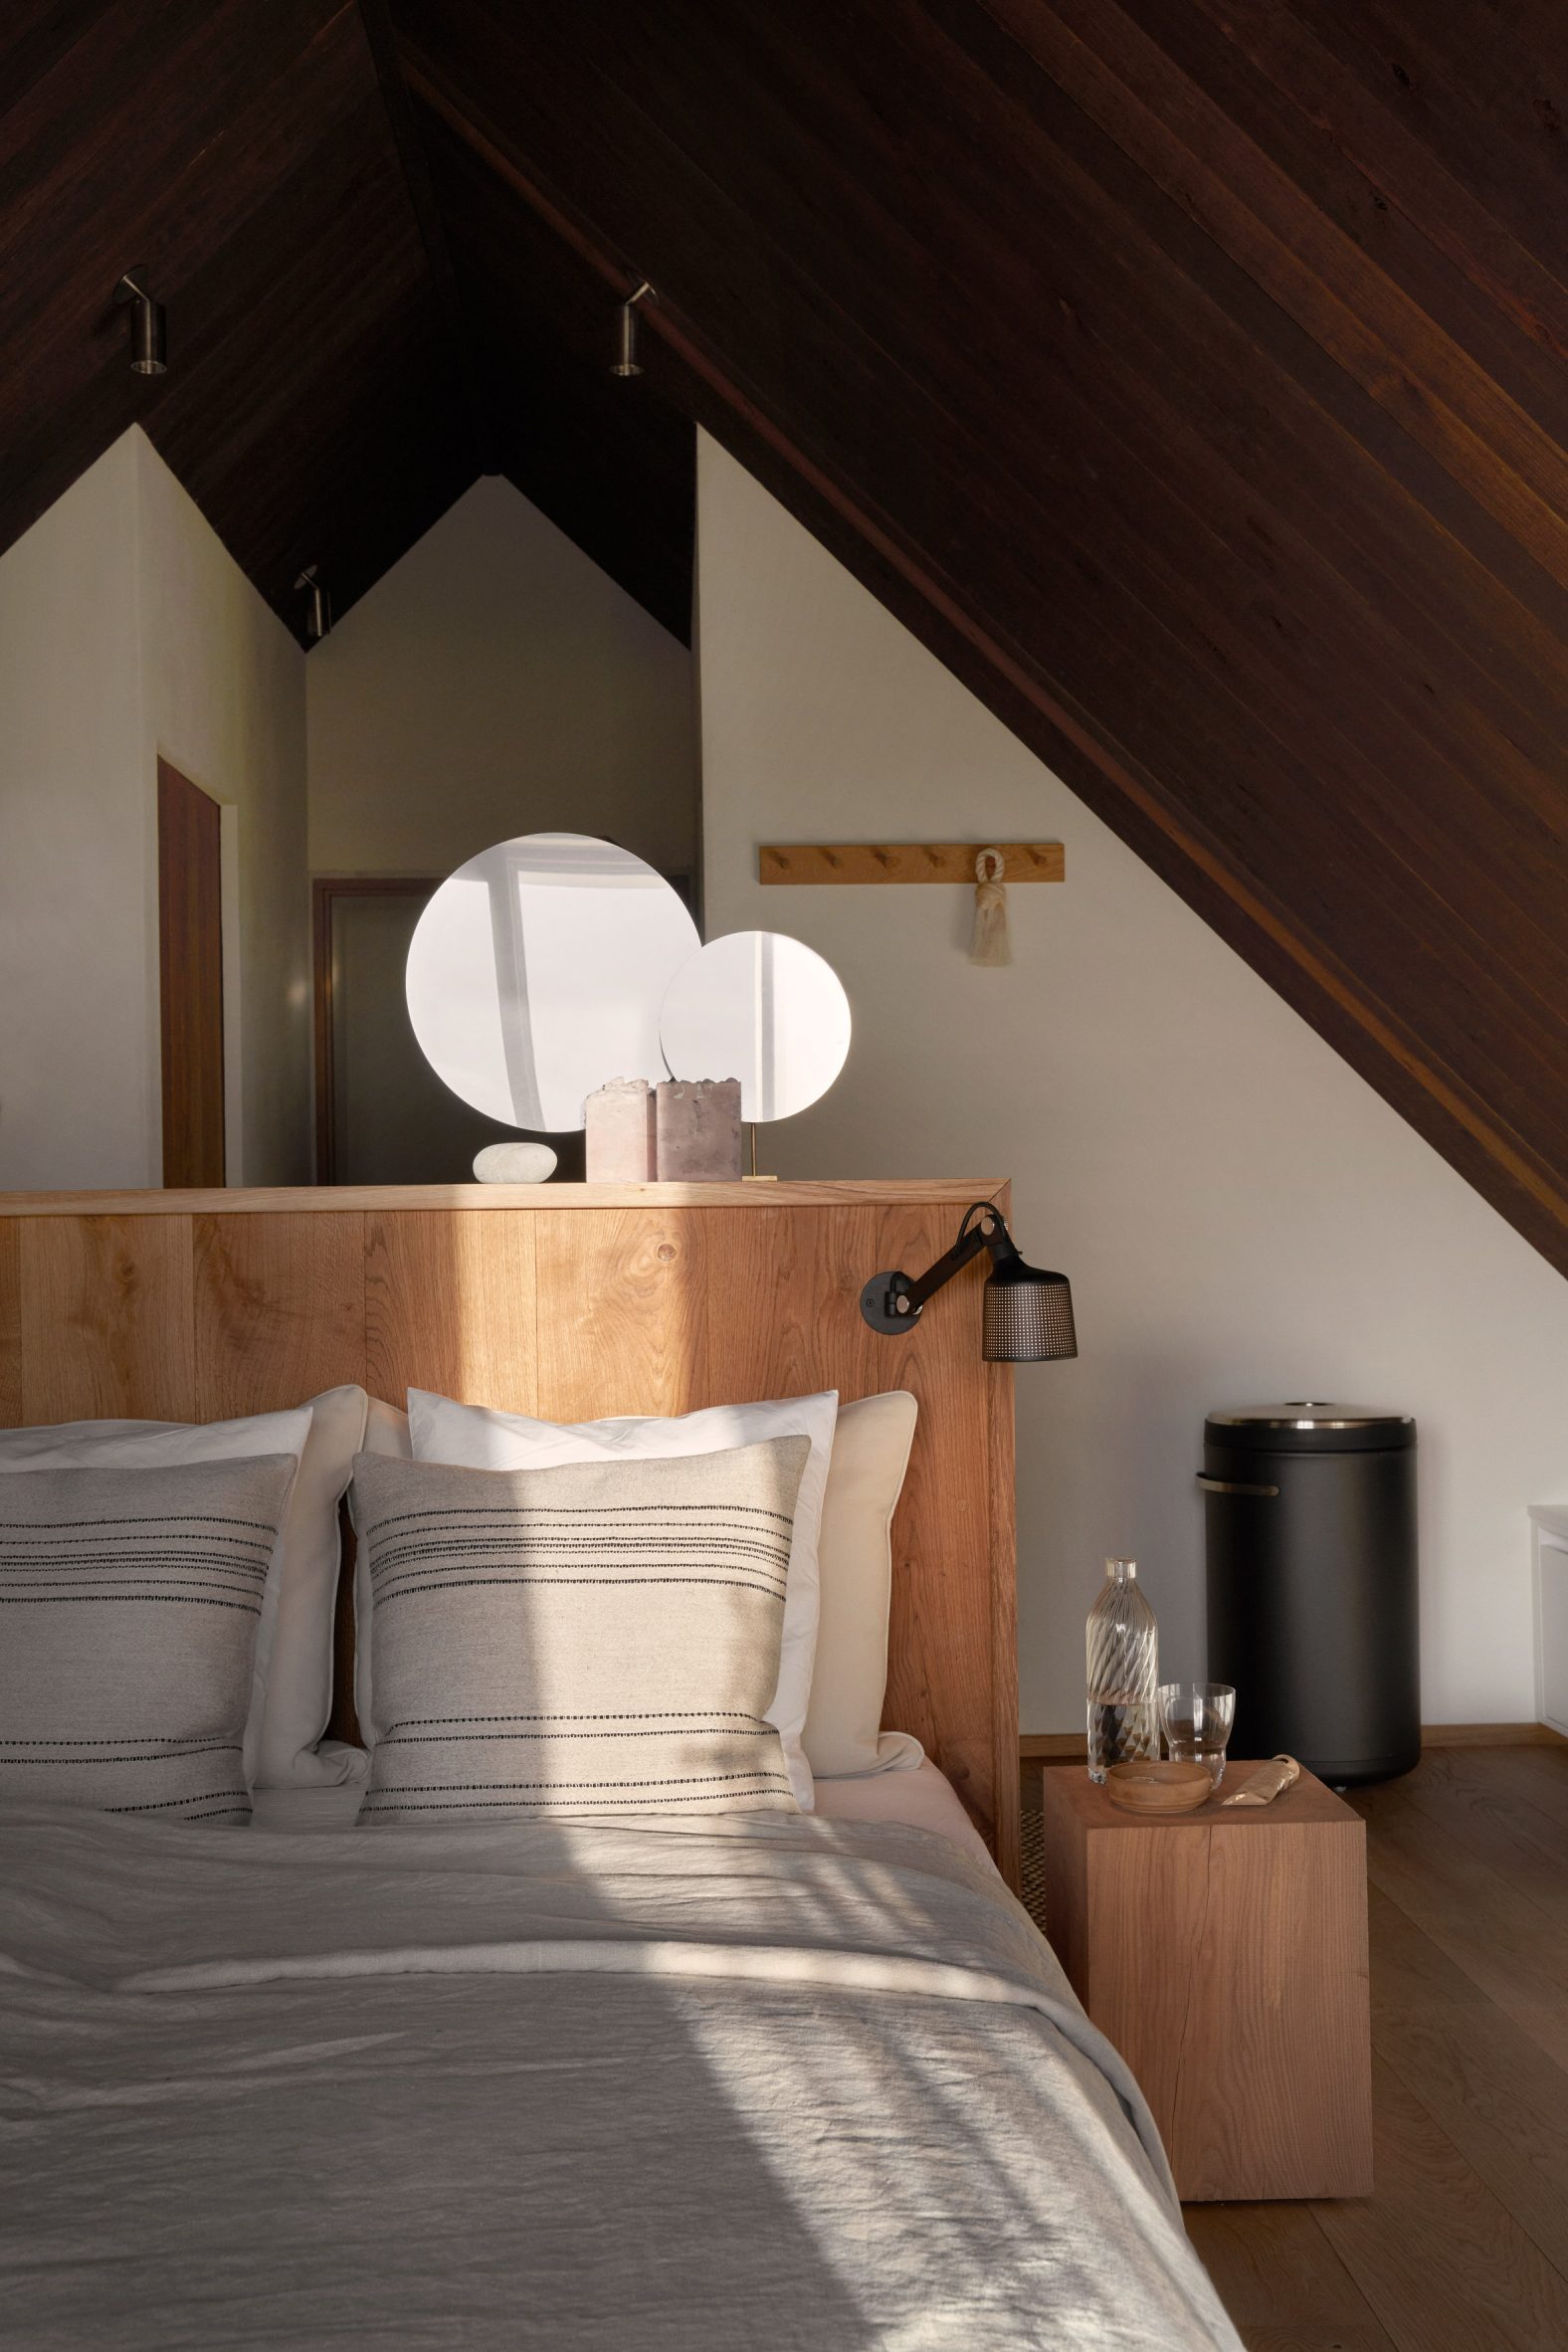 Wooden bed and gable in Vipp Cold Hawaii Guesthouse by Hahn Lavsen in Denmark